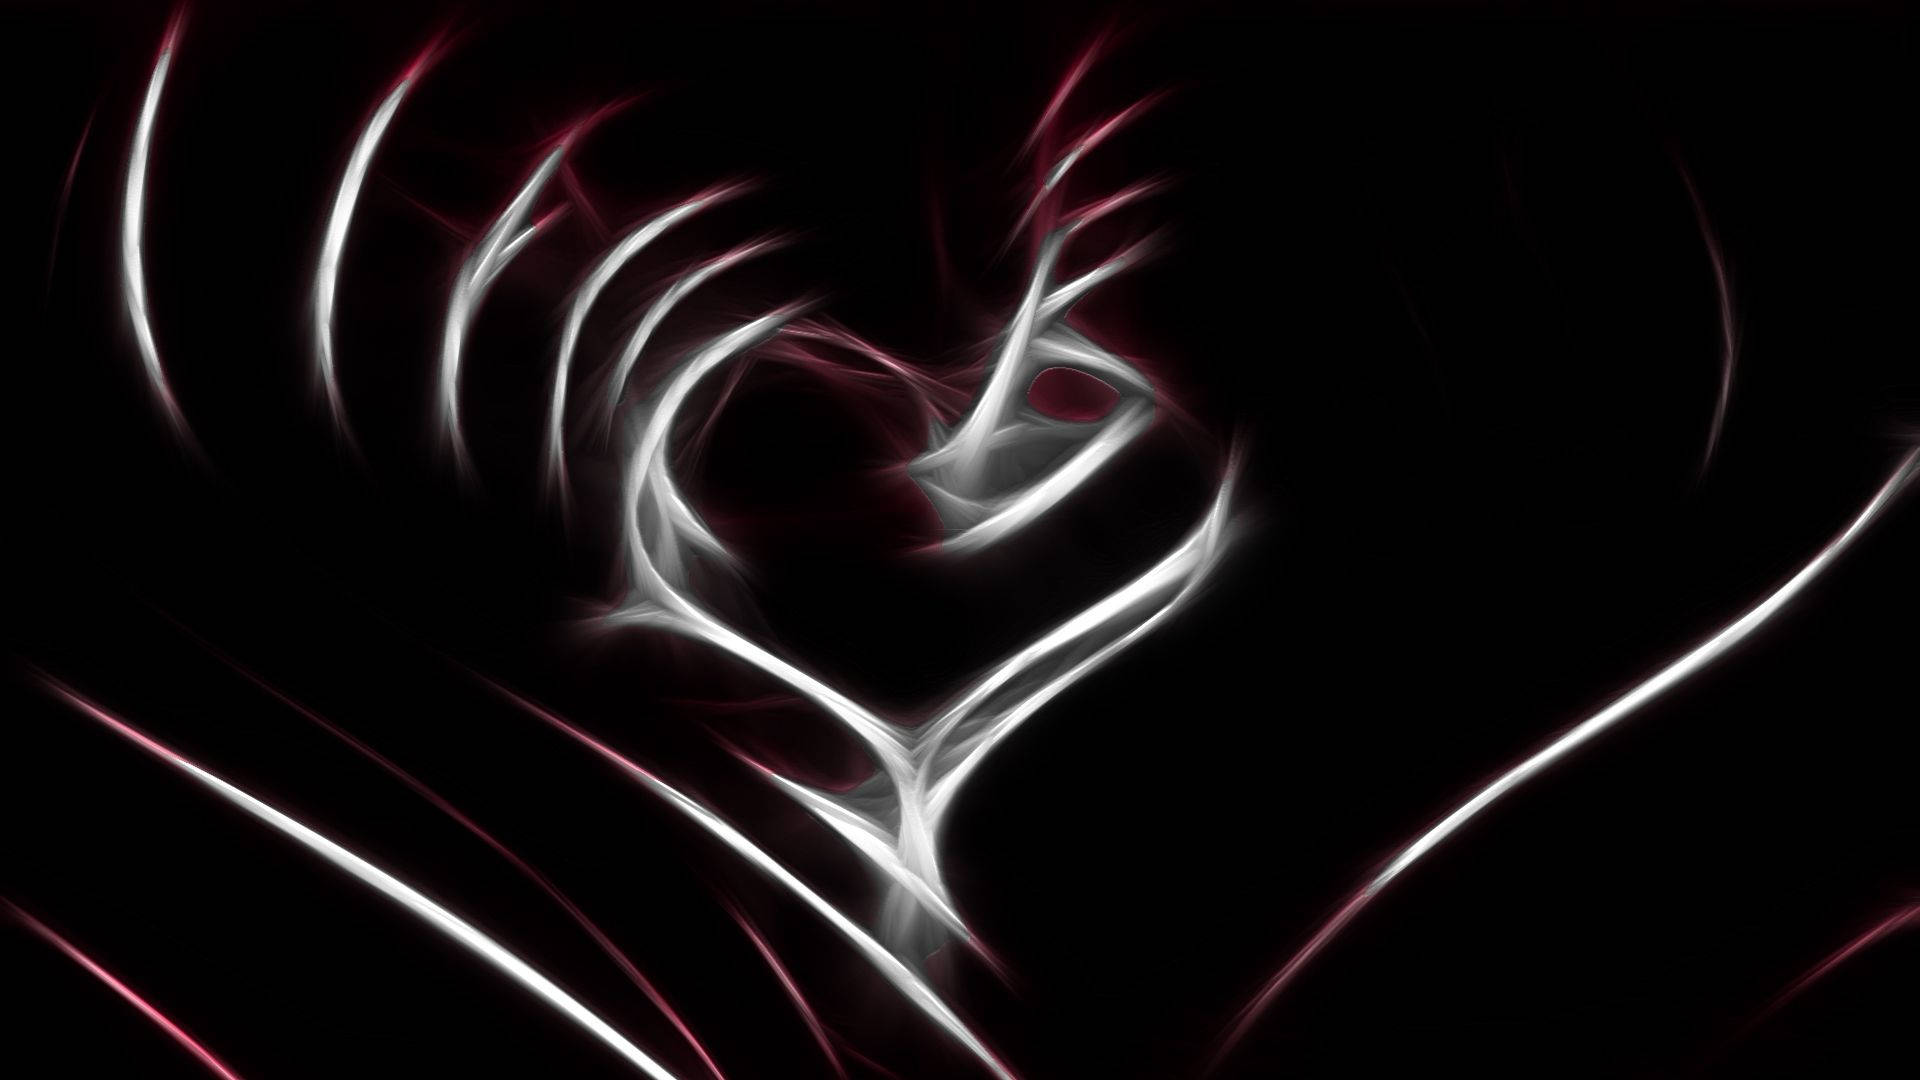 Abstract Black Heart With Stylistic White Lines Background